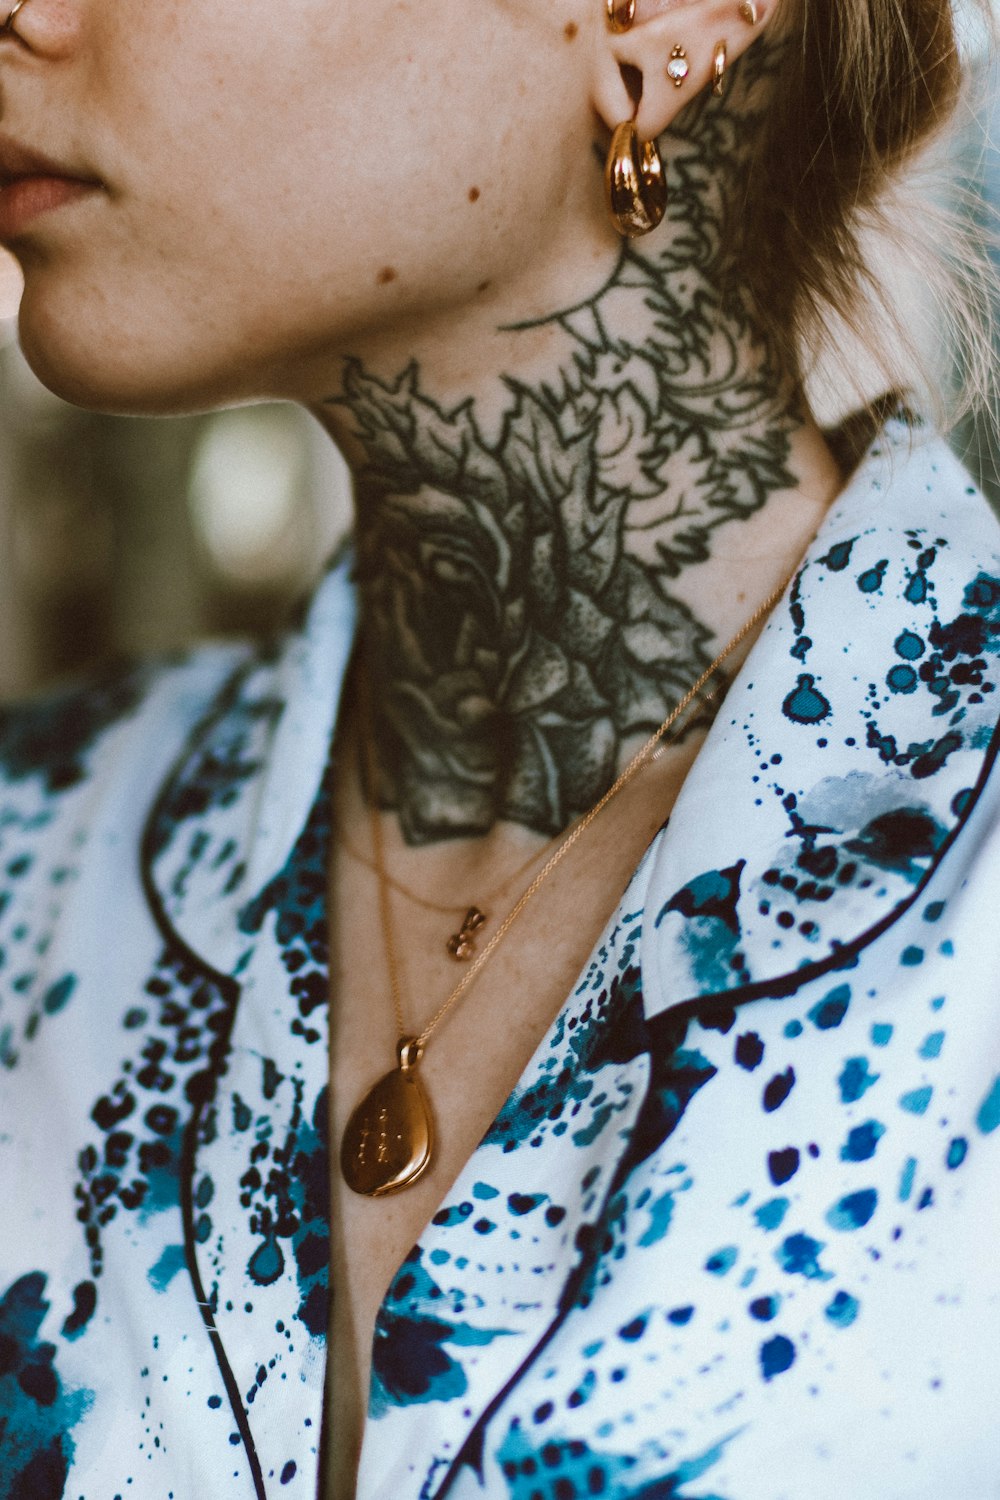 a woman with tattoos on her neck smoking a cigarette